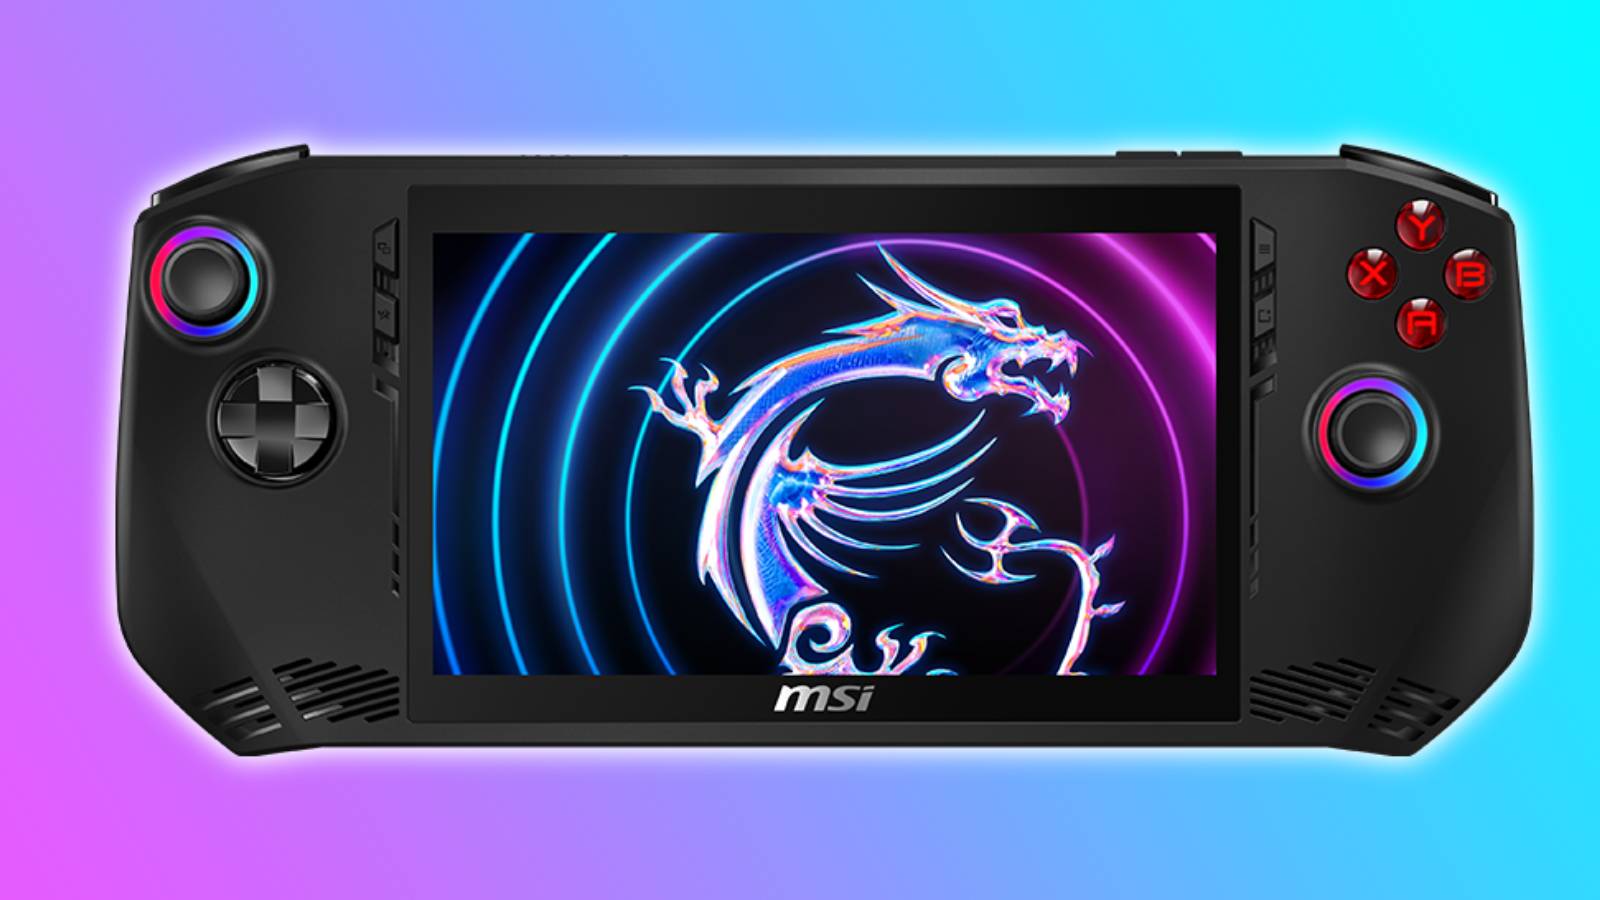 Image of the MSI Claw handheld on a pink and blue background.